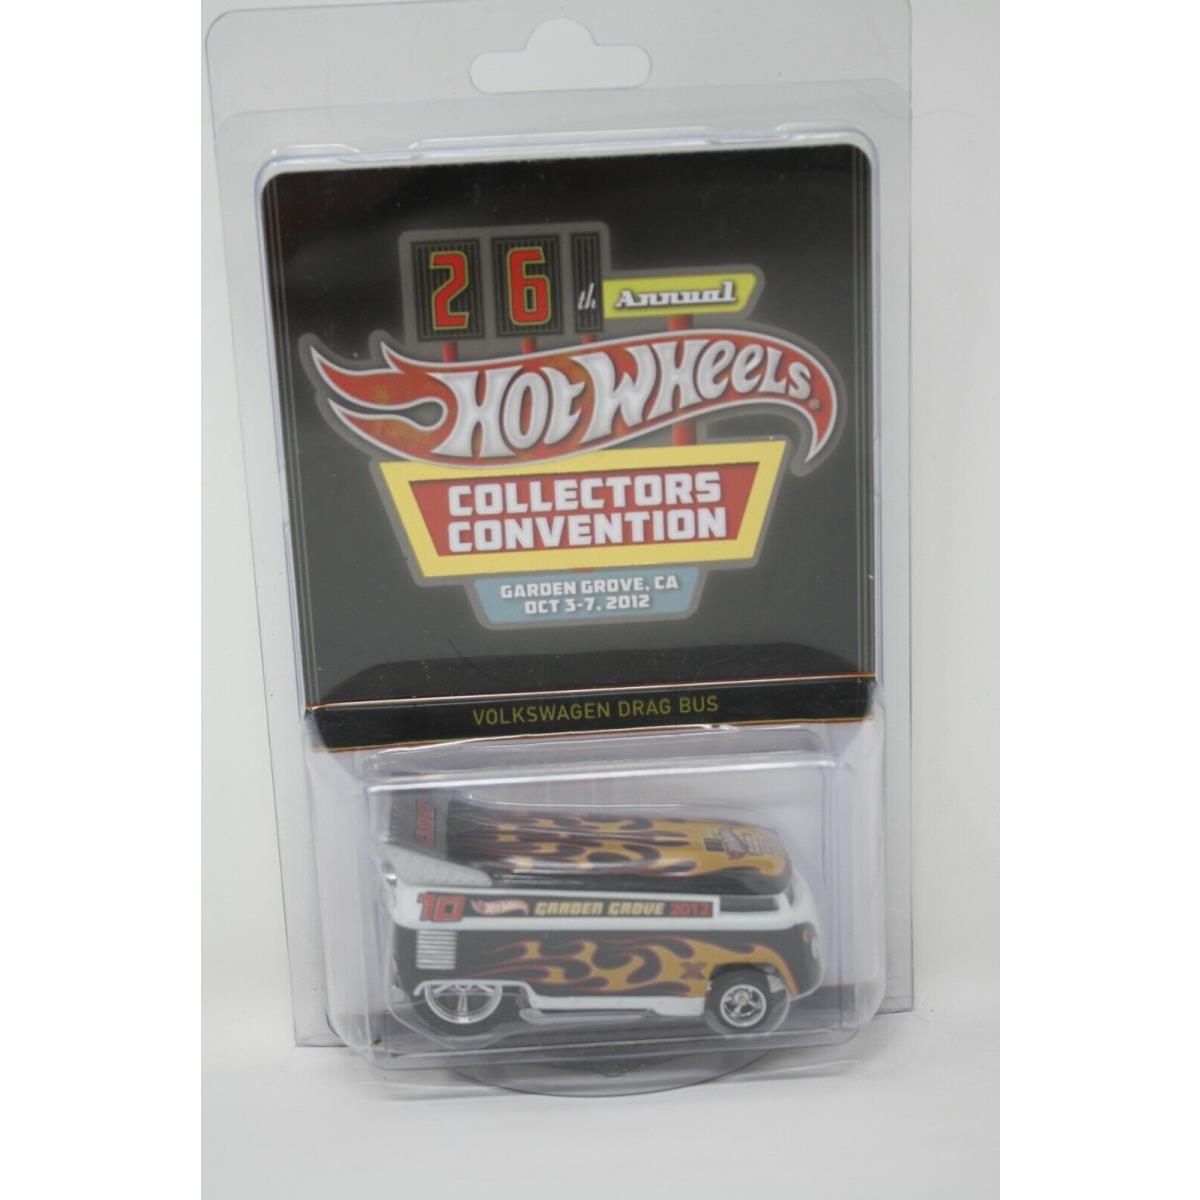 Hot Wheels 26TH Convention Volkswagen Drag Bus 1546 ON Card